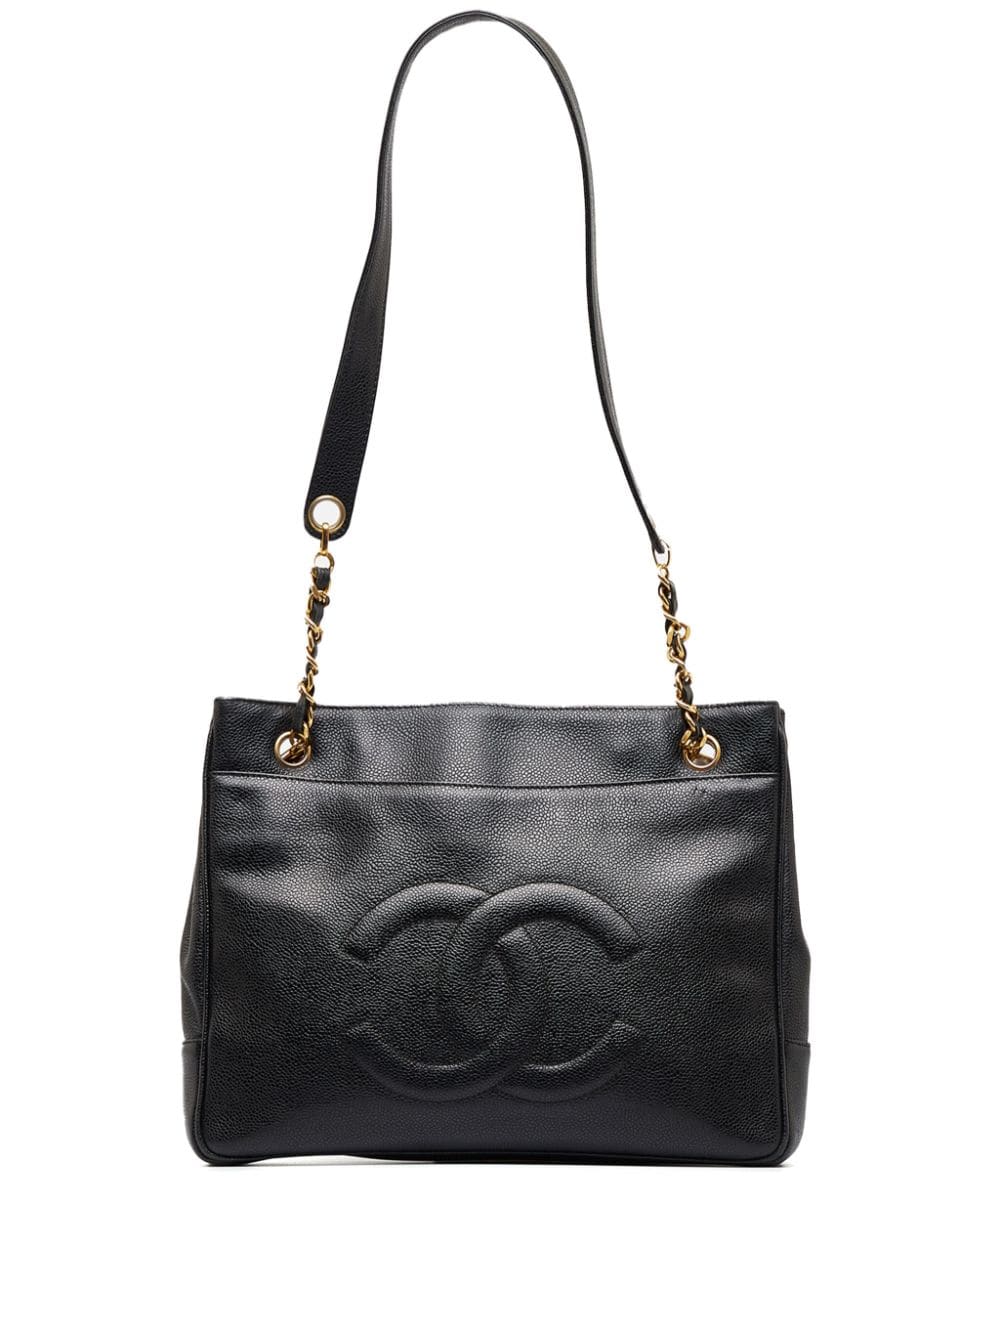 Chanel Vintage Chanel Black Quilted Caviar Leather Shopping Tote Bag